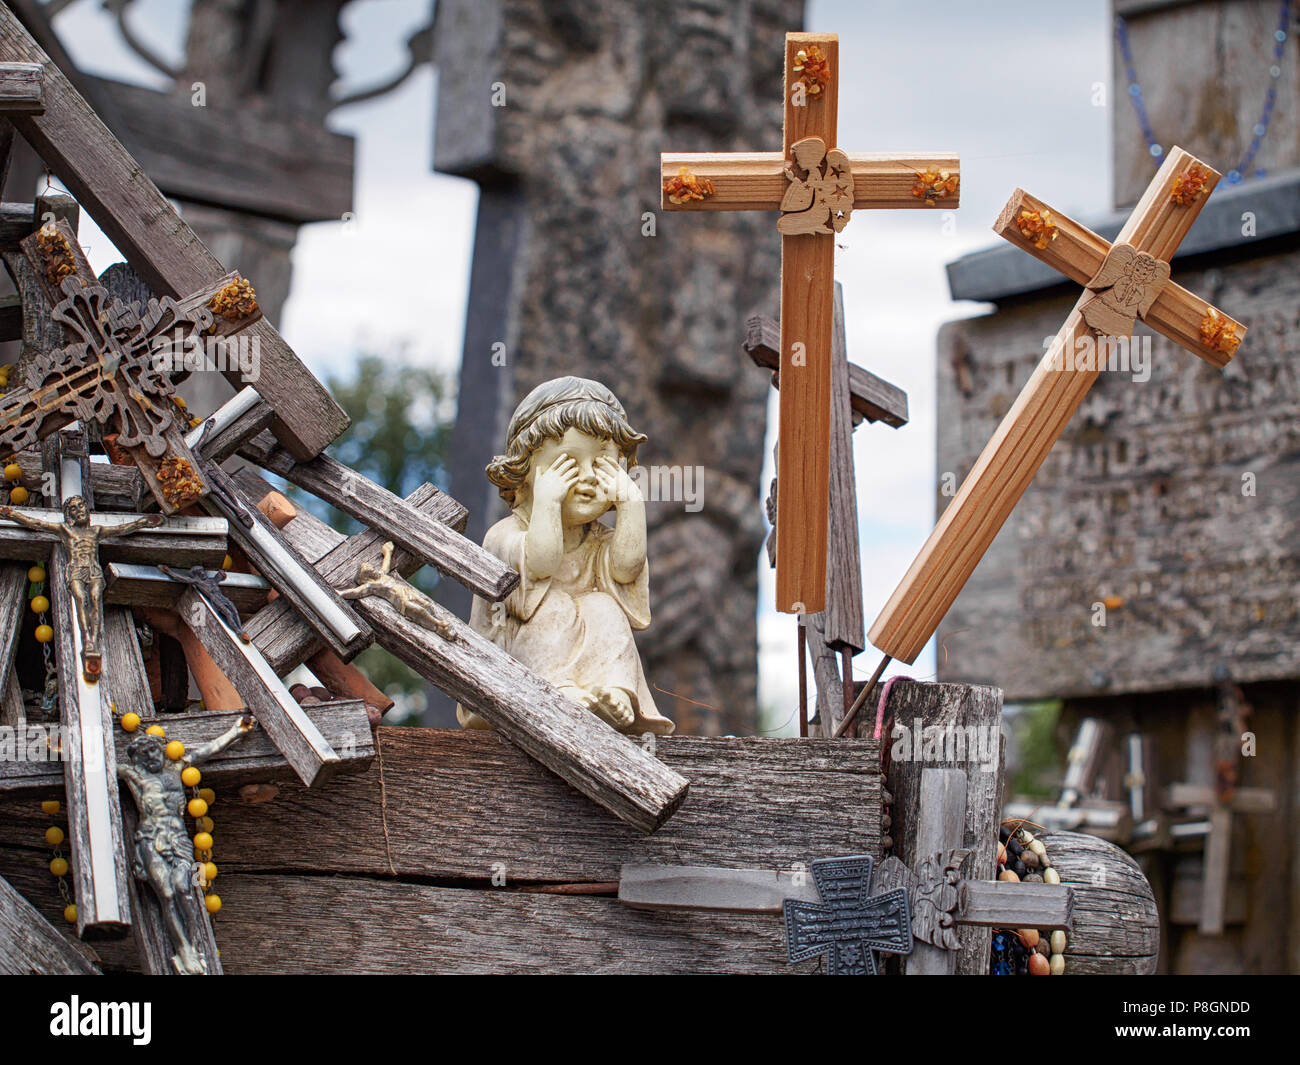 Statuette of a little girl surrounded by wooden crosses Stock Photo